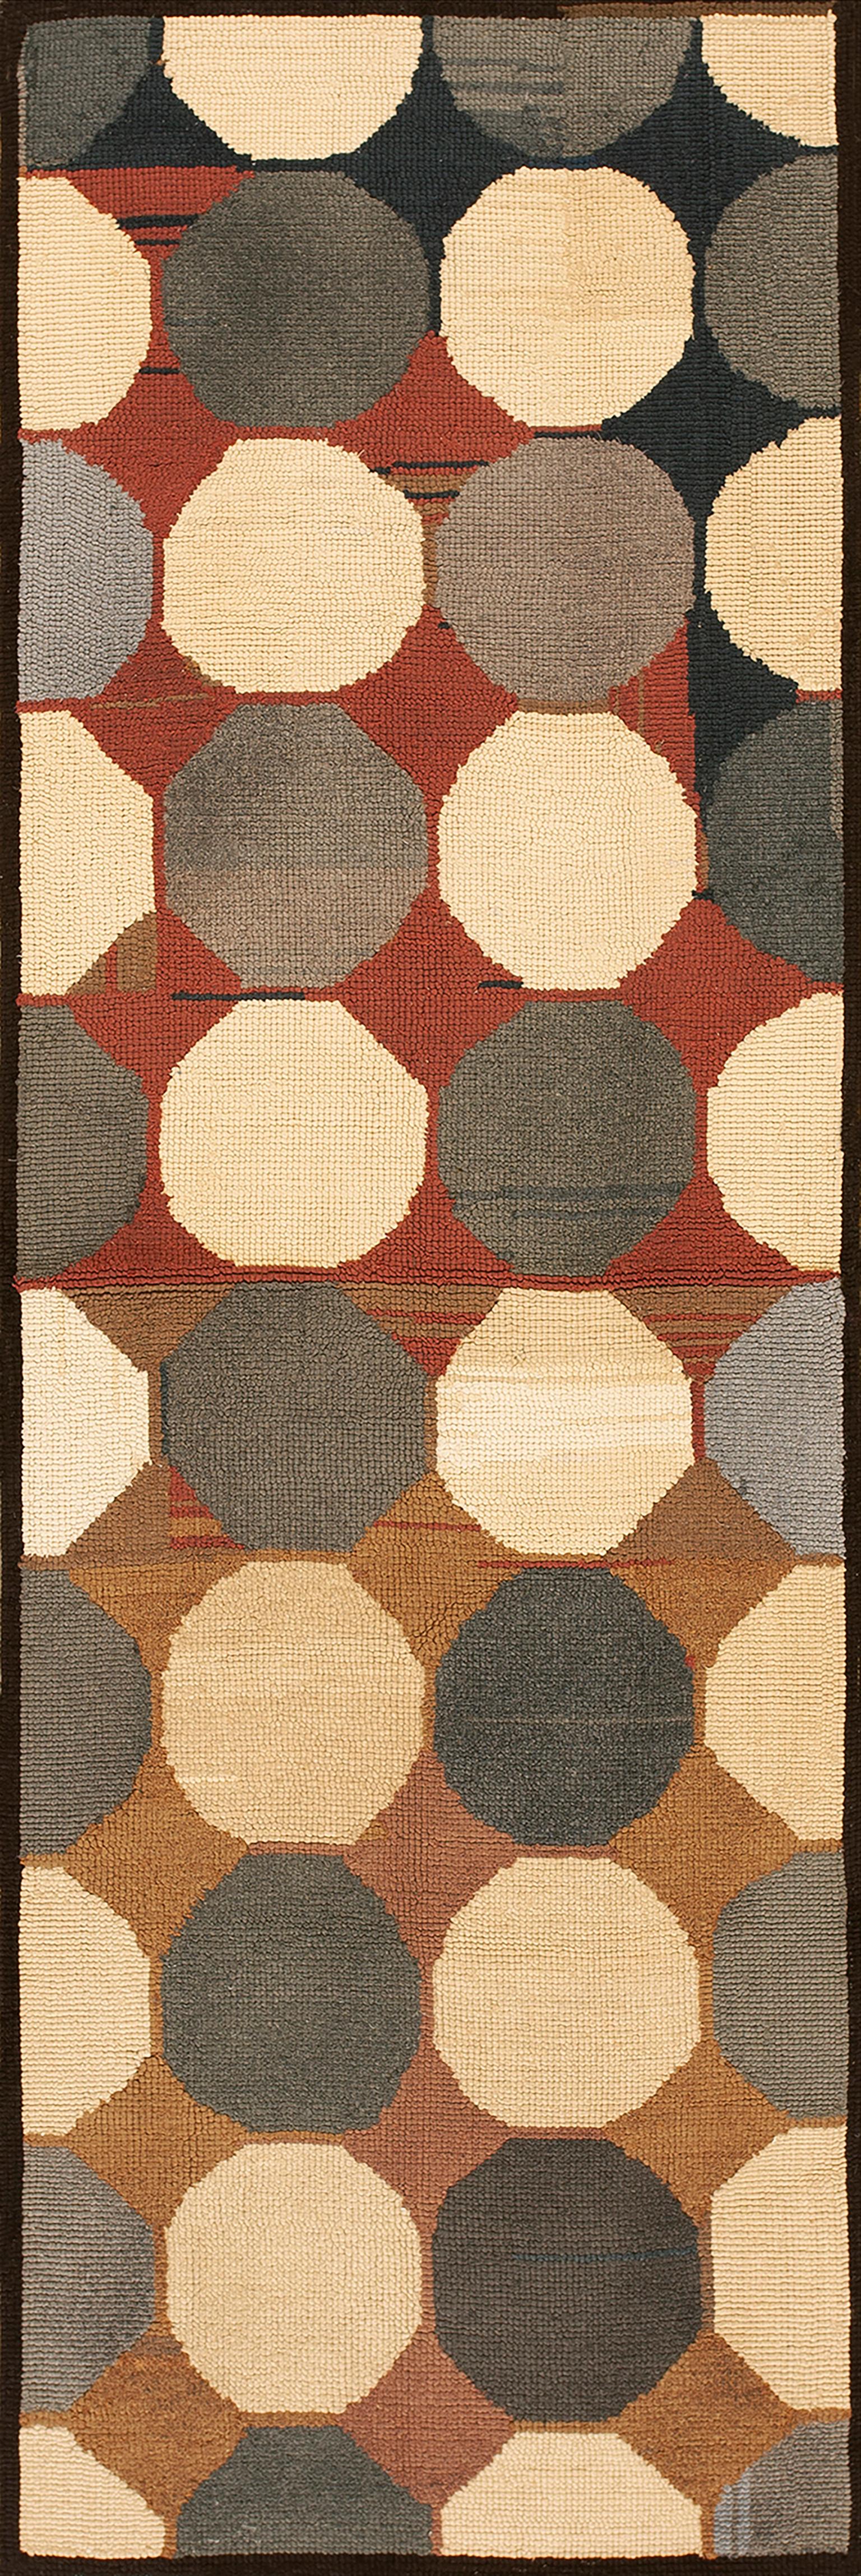 Mid 20th Century American Hooked Rug ( 4'1'' x 8'9'' - 125 x 267 ) For Sale 2